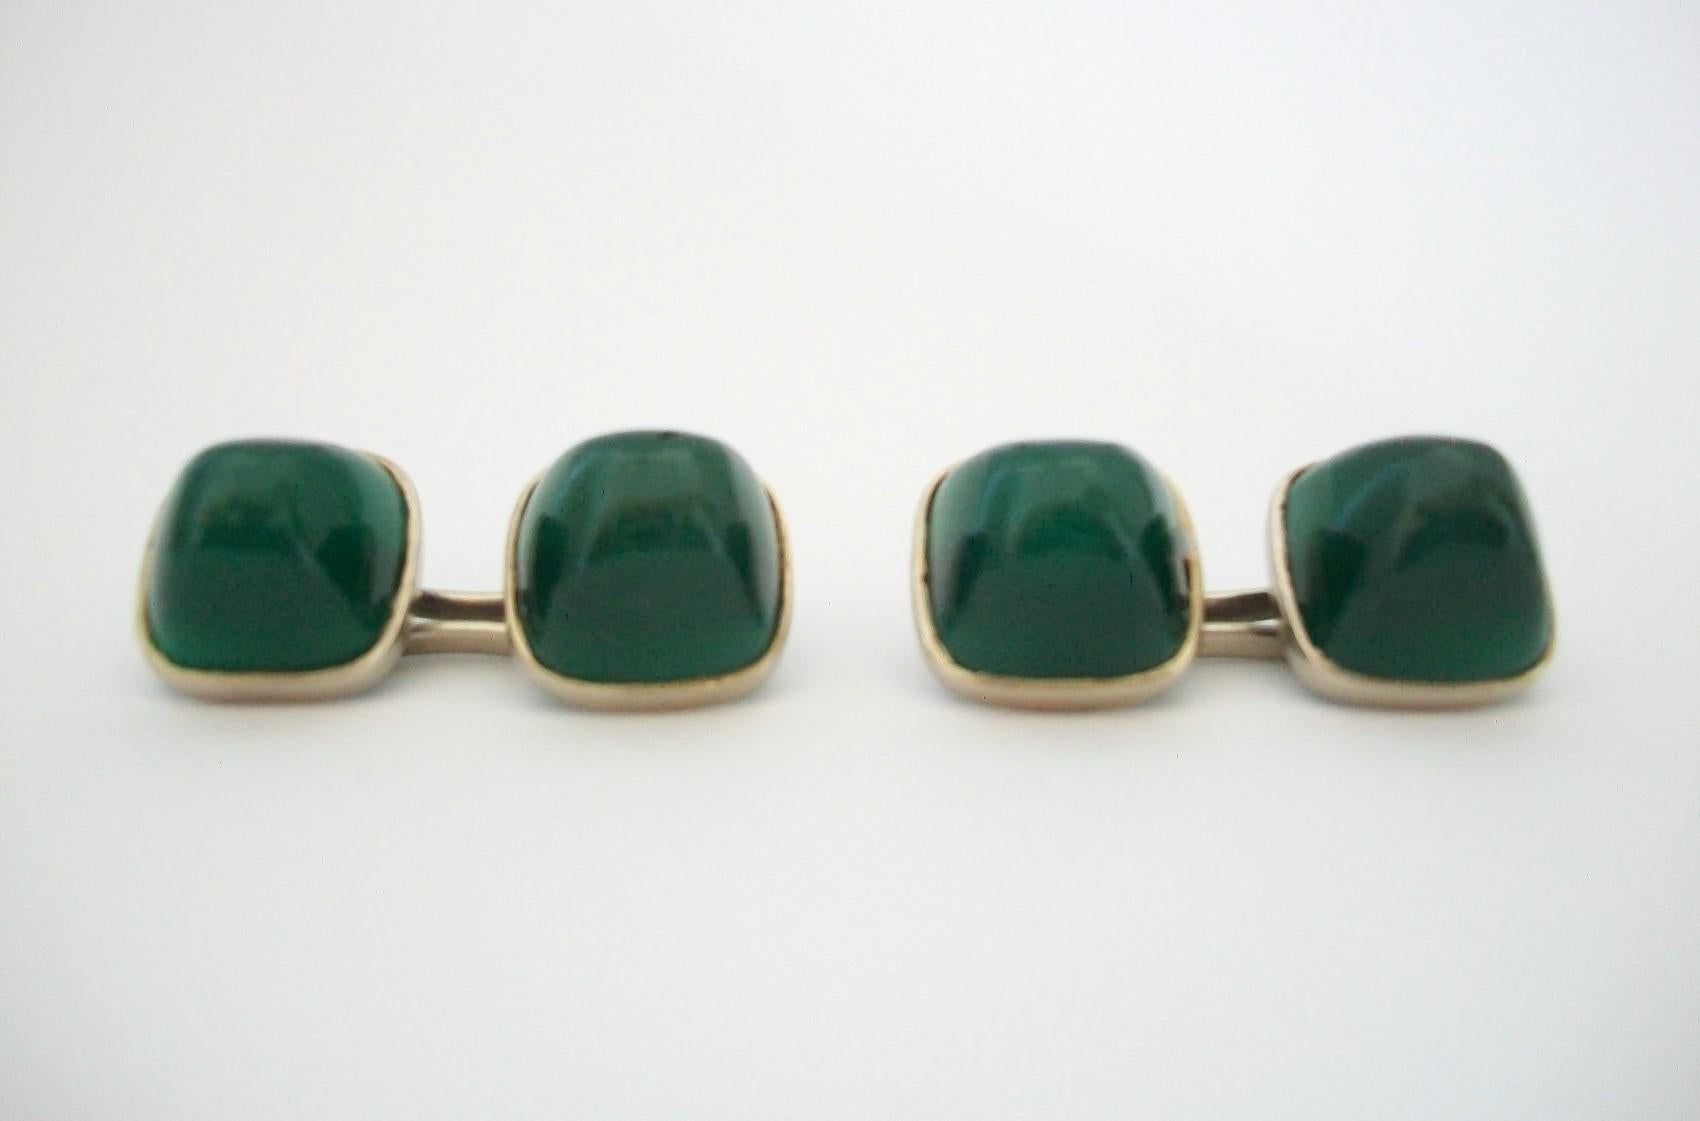 Rare Art Deco sugarloaf Chrysoprase and 18K white gold cufflinks - refined and elegant double sided design - hand made to the highest quality - each sugarloaf Chrysoprase bezel set (approx. 5.64 carats each - total of 22.56 carats - 10 x 10 x 8 mm.)